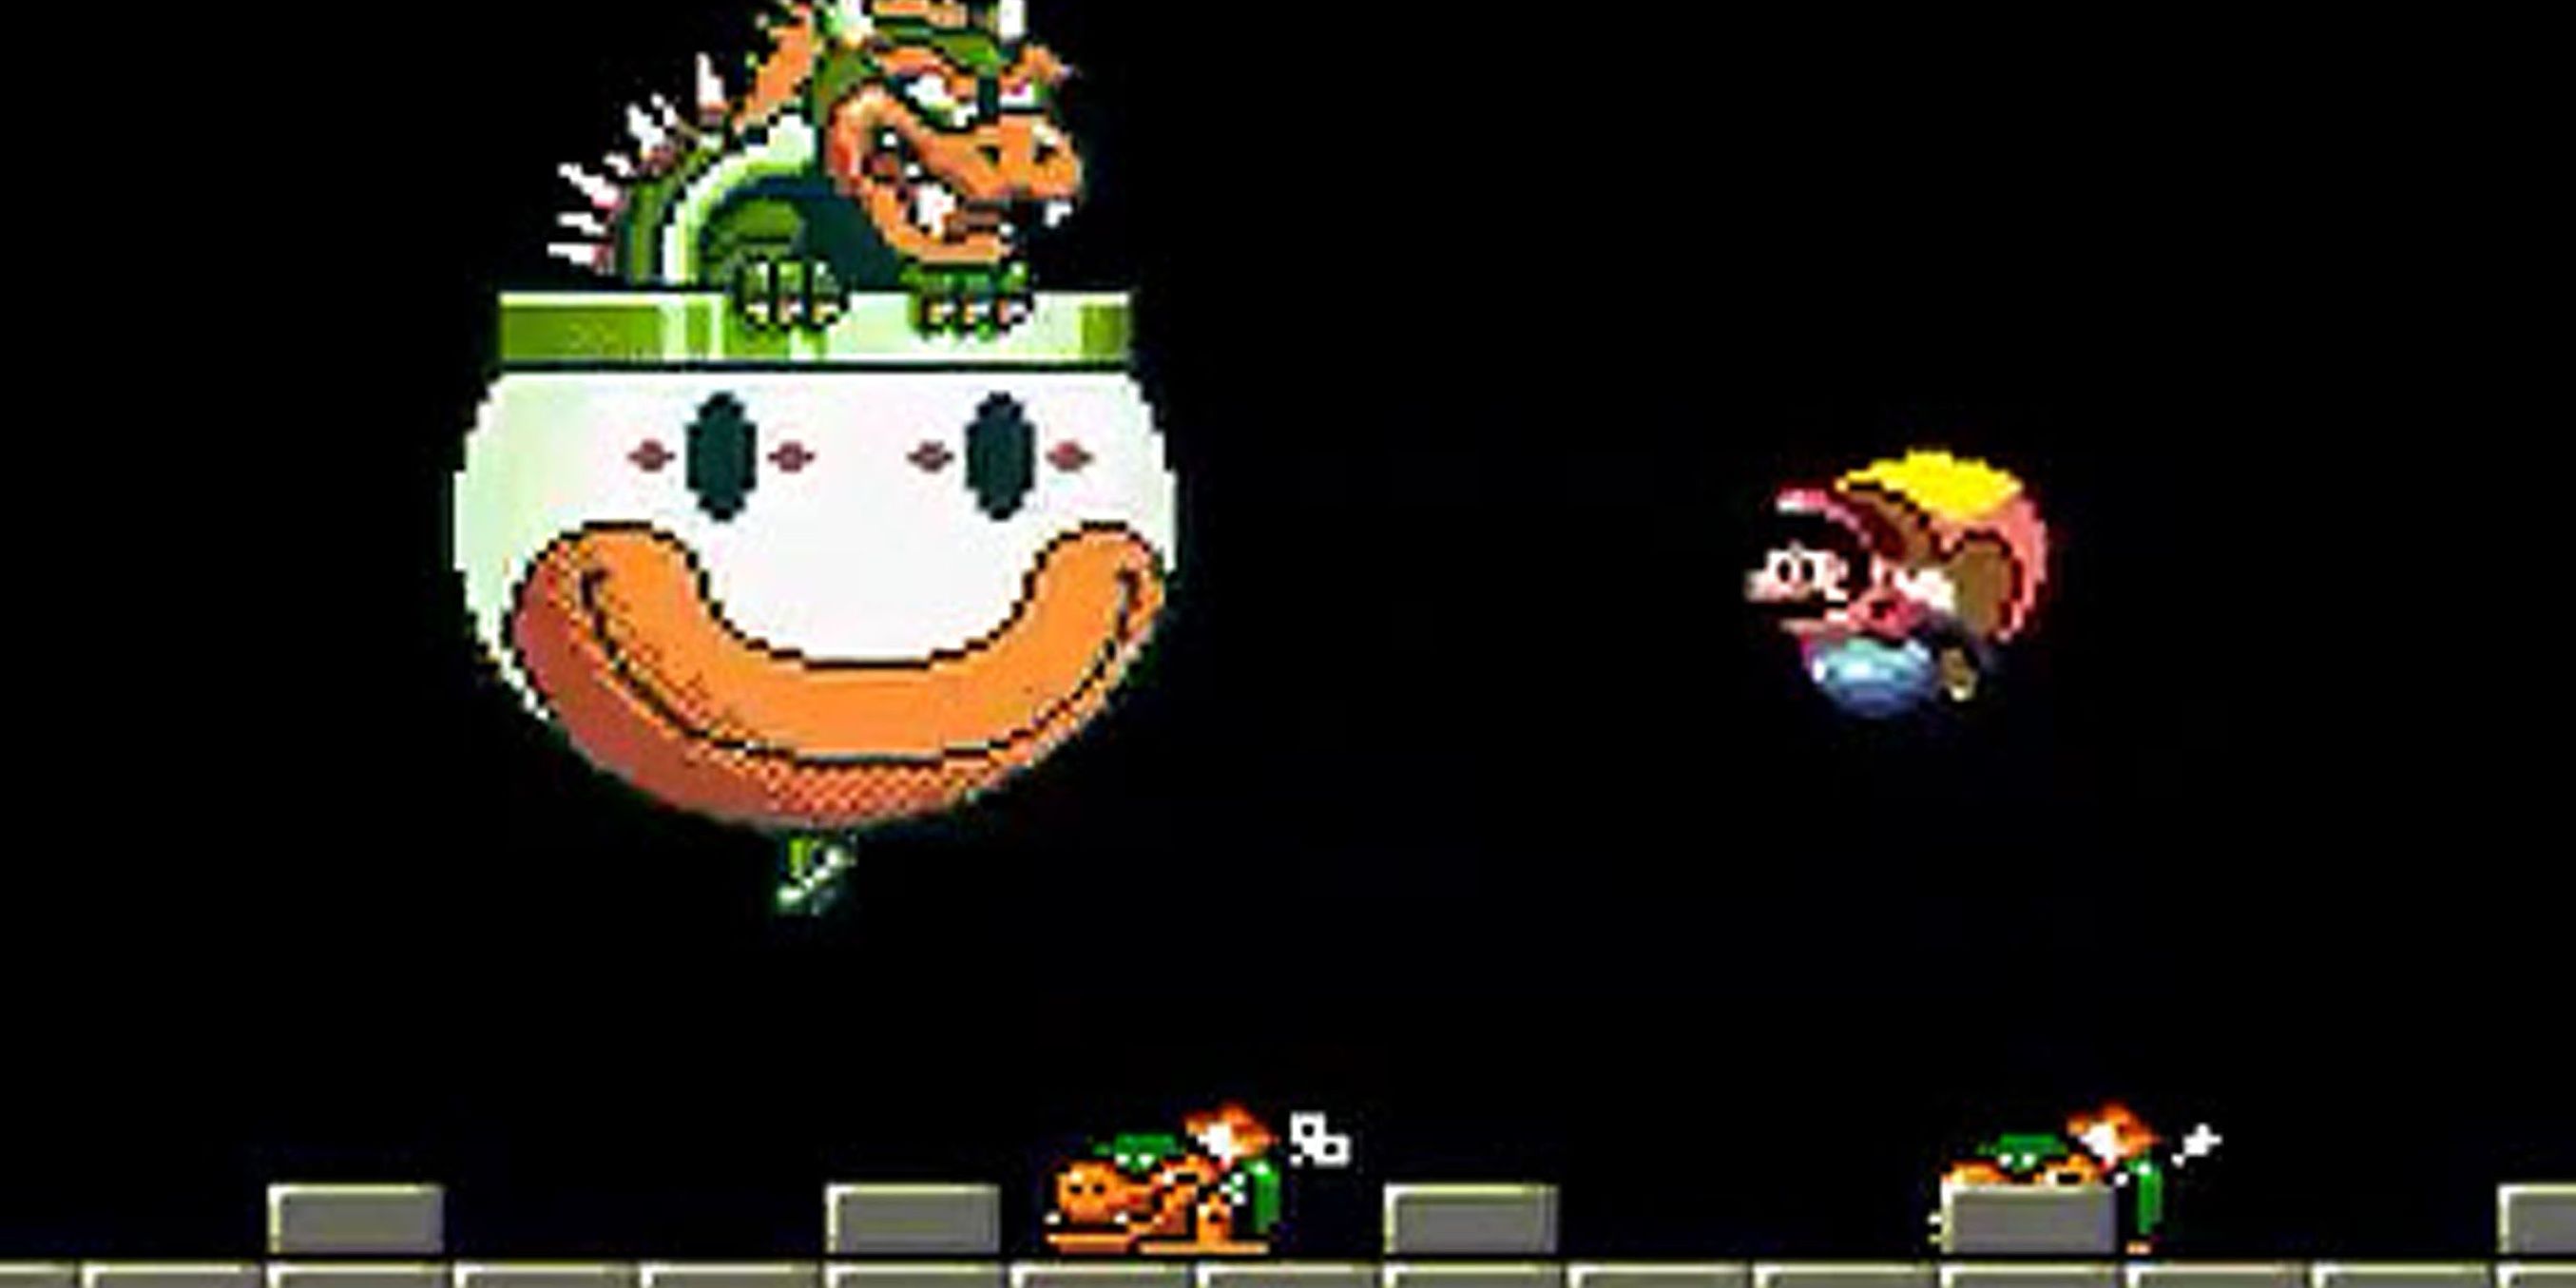 Super Mario Every Bowser Battle In Gaming History Ranked 0176